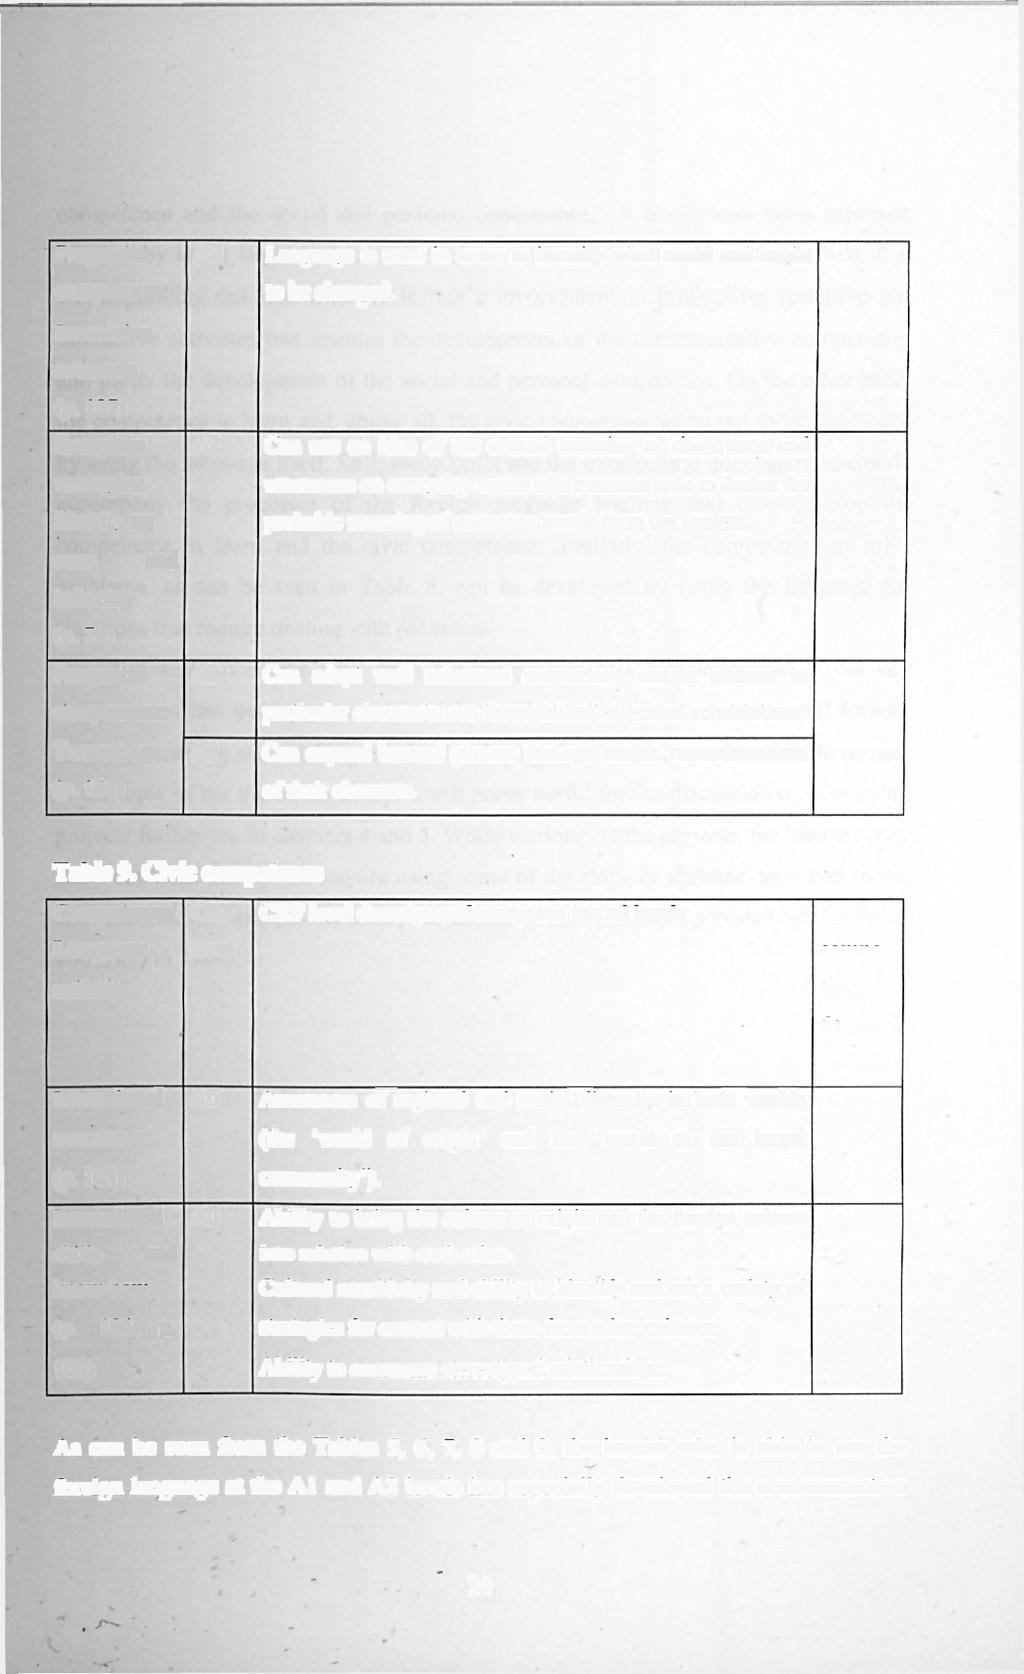 Pragmatic competence: Interaction schemata (p. 127) Reception strategies: Identifying cues and inferring (P- 72) Pragmatic competence: Turn taking (p.